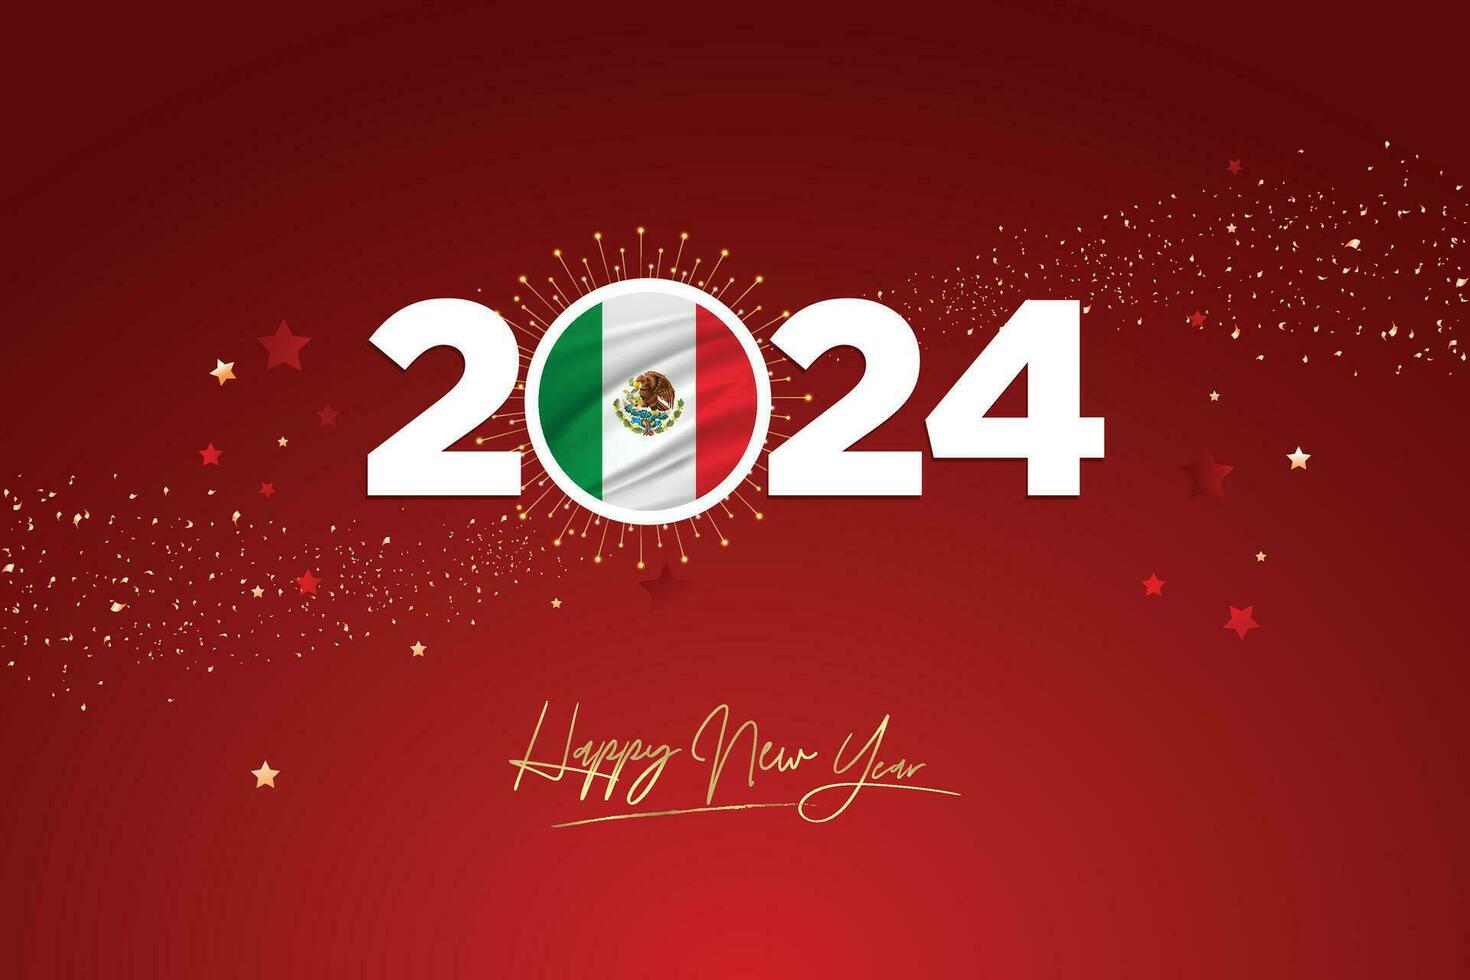 Colorful Happy New Year Festival Design Banner, New Year 2024 Logo with Mexican Flag on Red-Maroon Confetti and star Background, Calendar 2024, Social Media New Year Banner, Post Card, Greetings vector